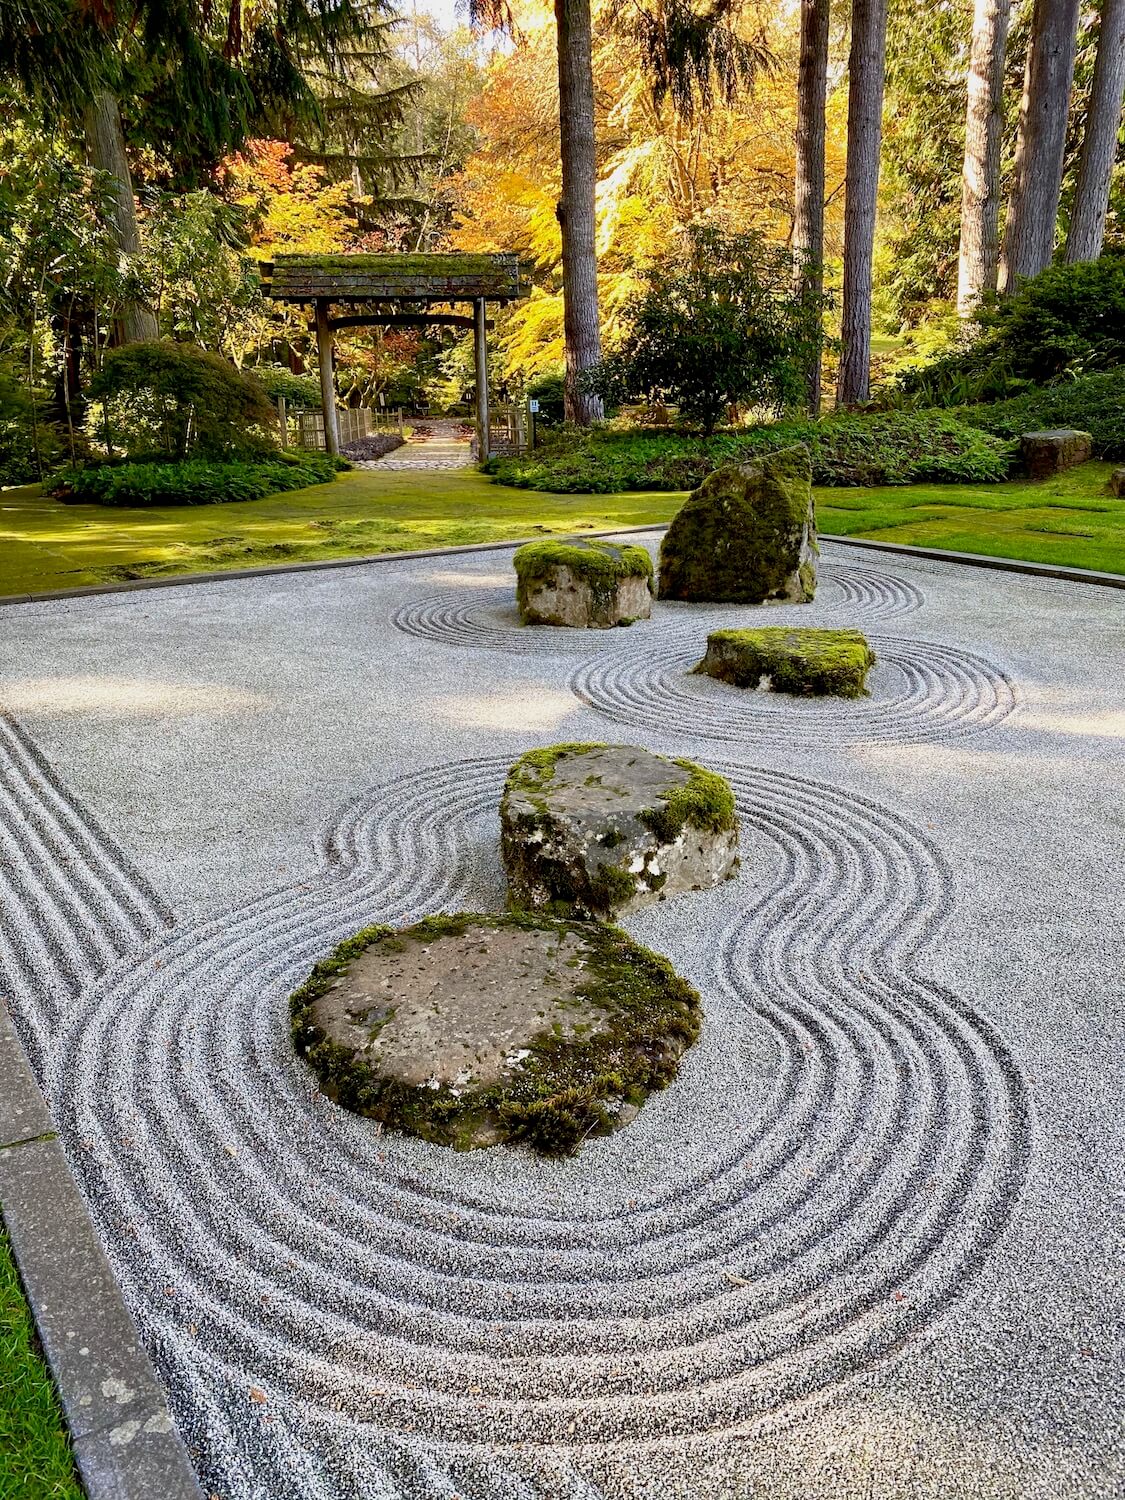 The garden outside the Japanese Guest House on the property of the Bloedel Reserve offers a peaceful escape in the zen of the raked gravel garden, surrounded by green squares of grass and alternating concrete.